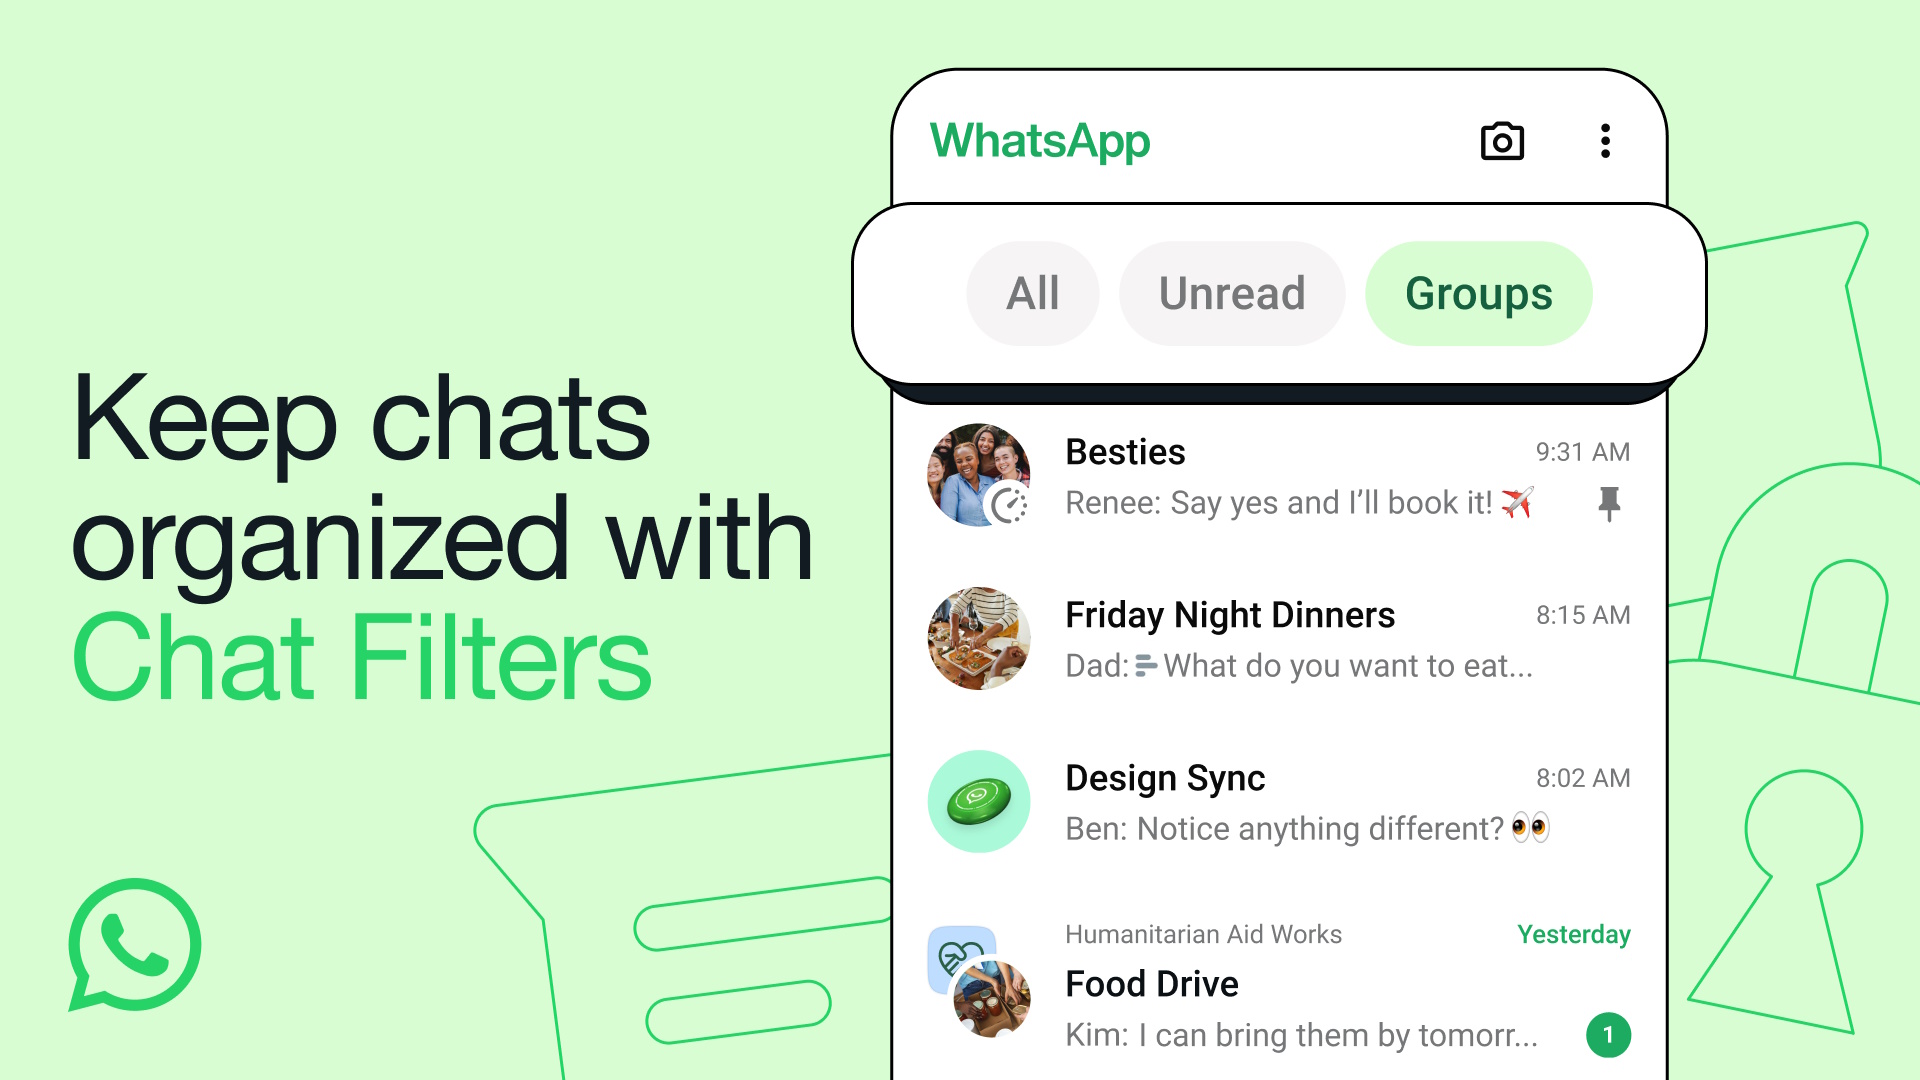 WhatsApp’s new chat filters make it easy to catch up on all of your unread messages